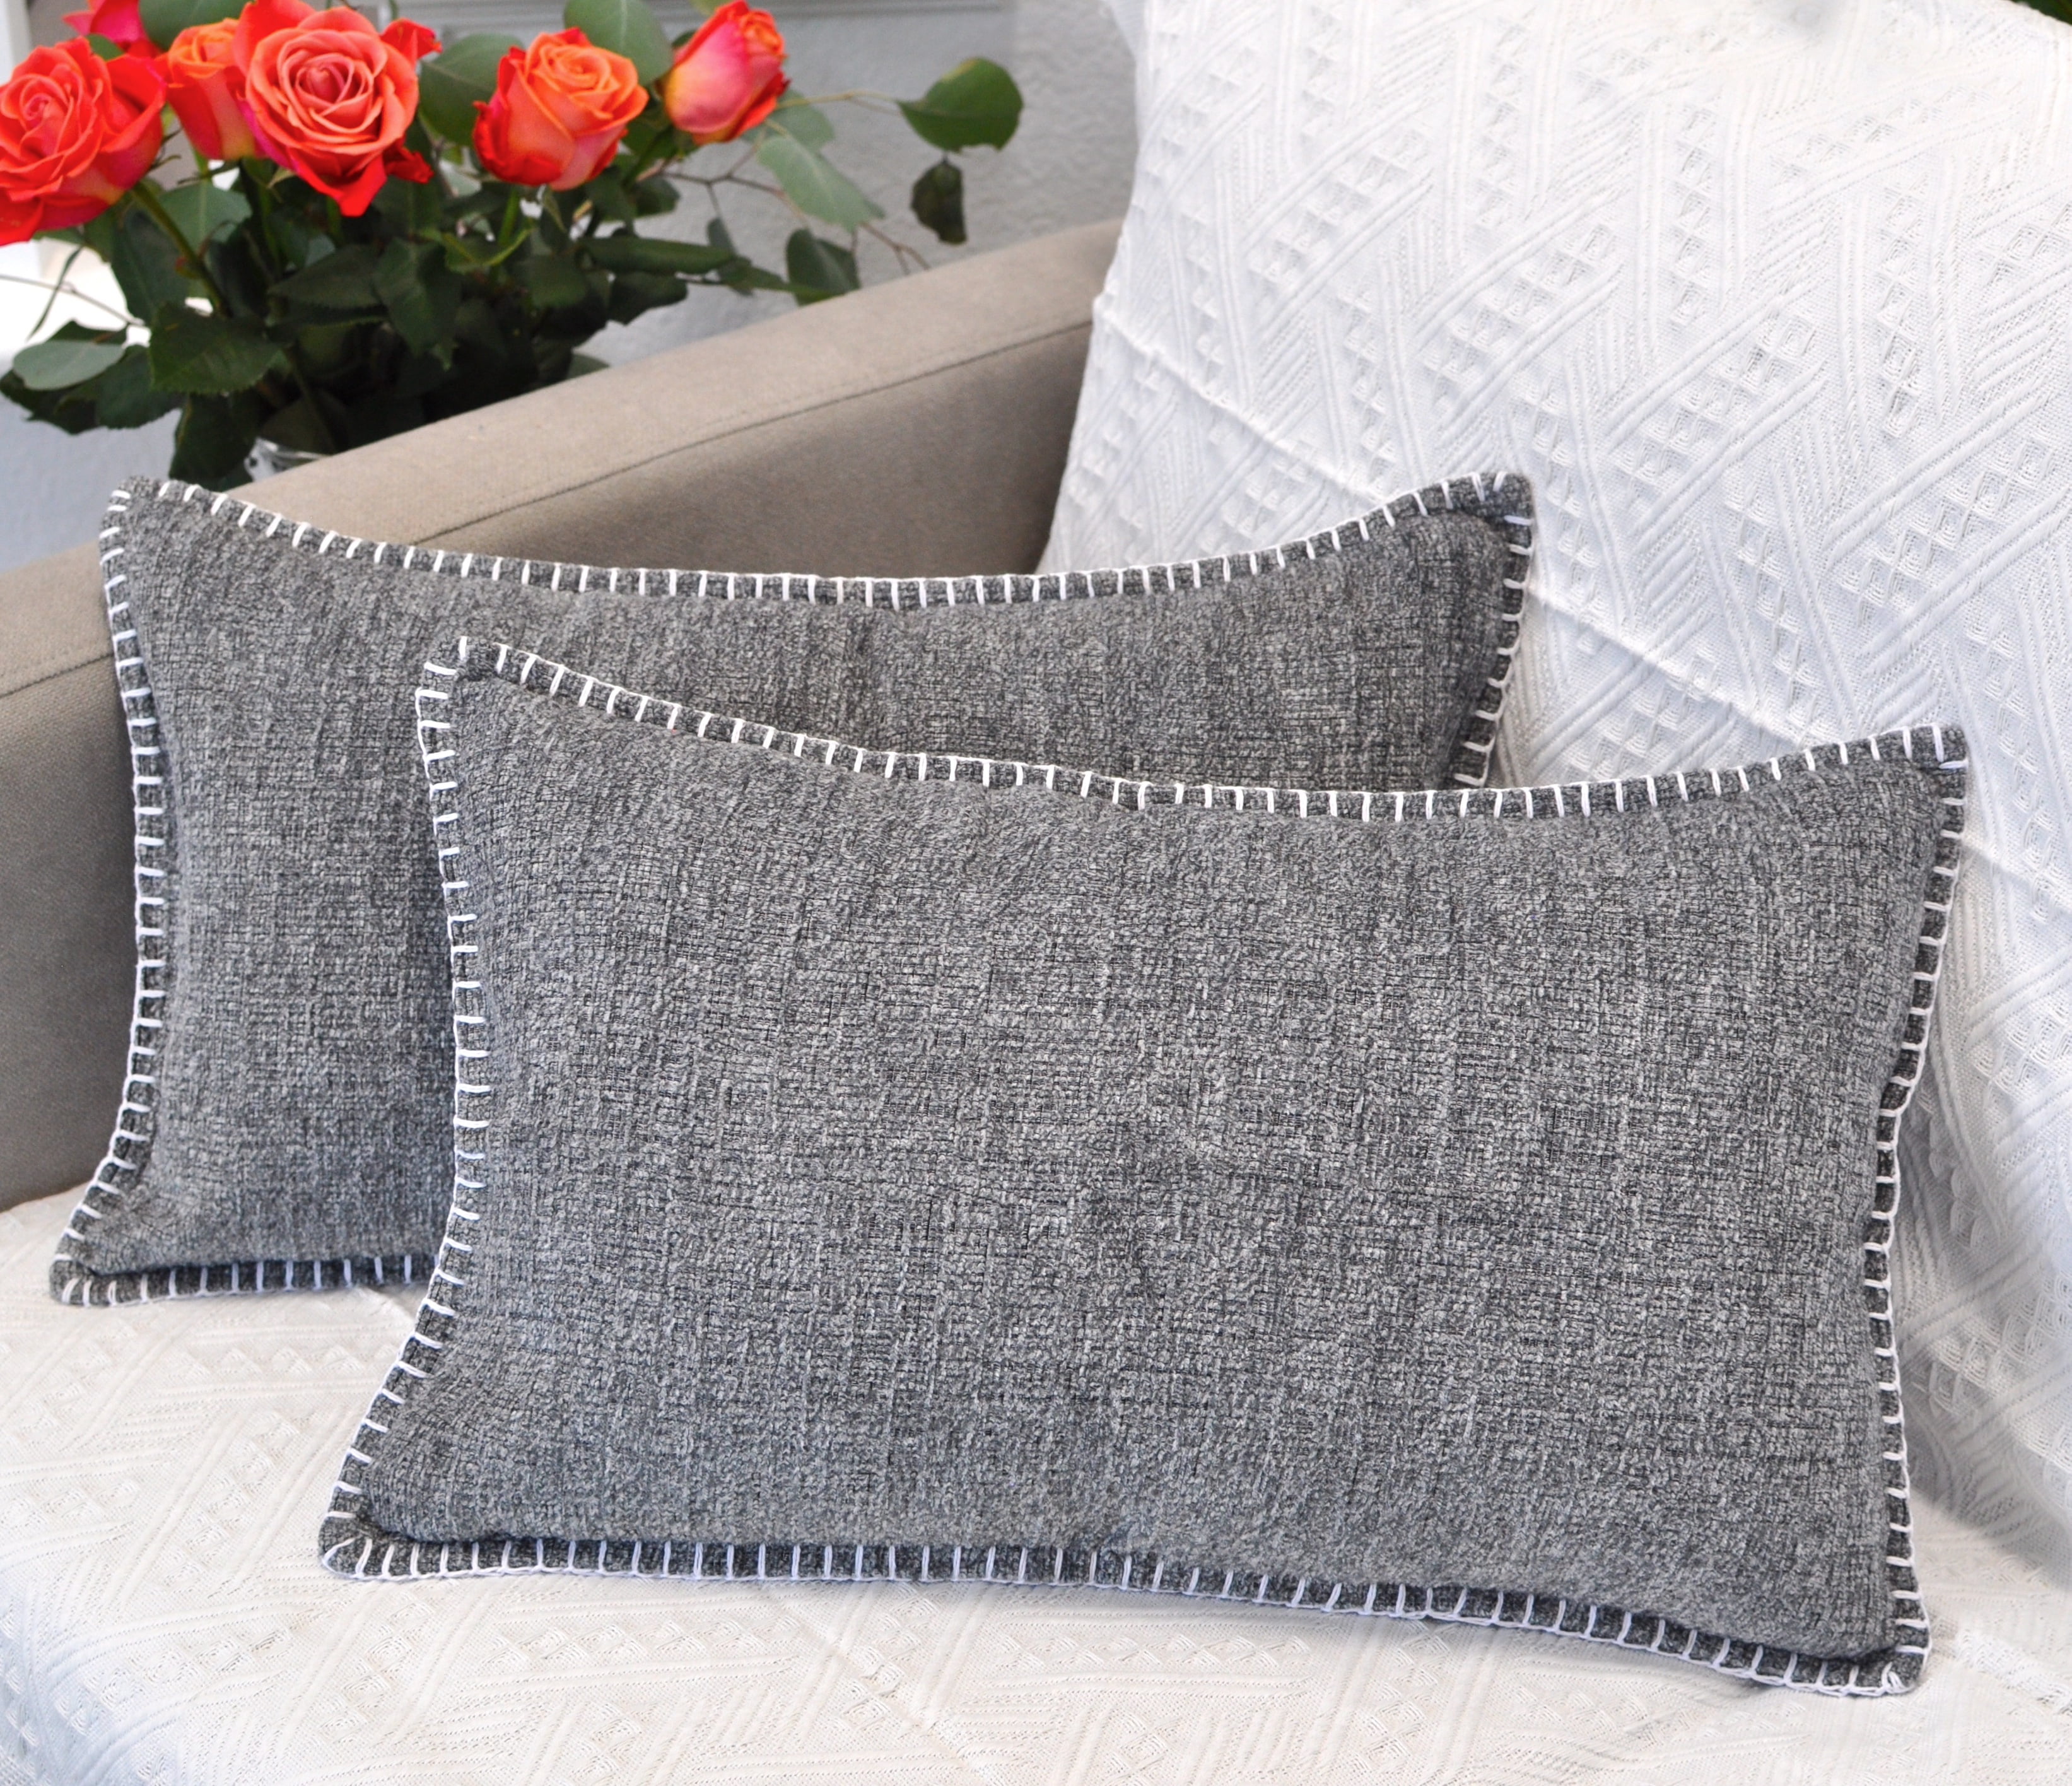 22x22 Pillow Cover Set of 2 Olive Green Soft Textured Chenille, Comfy Cozy  Large Cushion Covers for Couch Pillows, Modern Decor Square Big Pillows